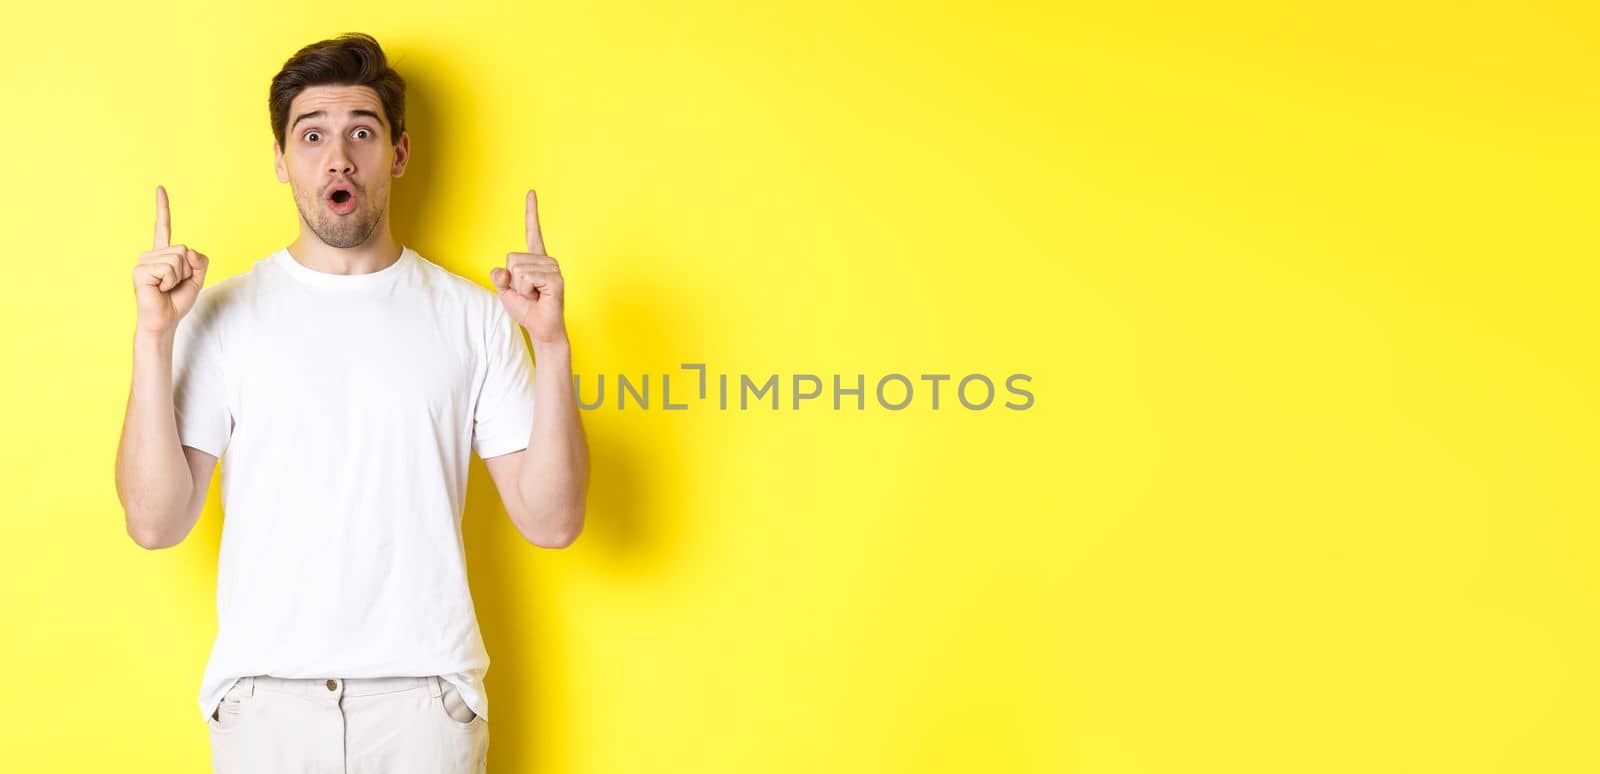 Surprised handsome guy in white t-shirt, pointing fingers up, interested about advertisement, standing against yellow background.